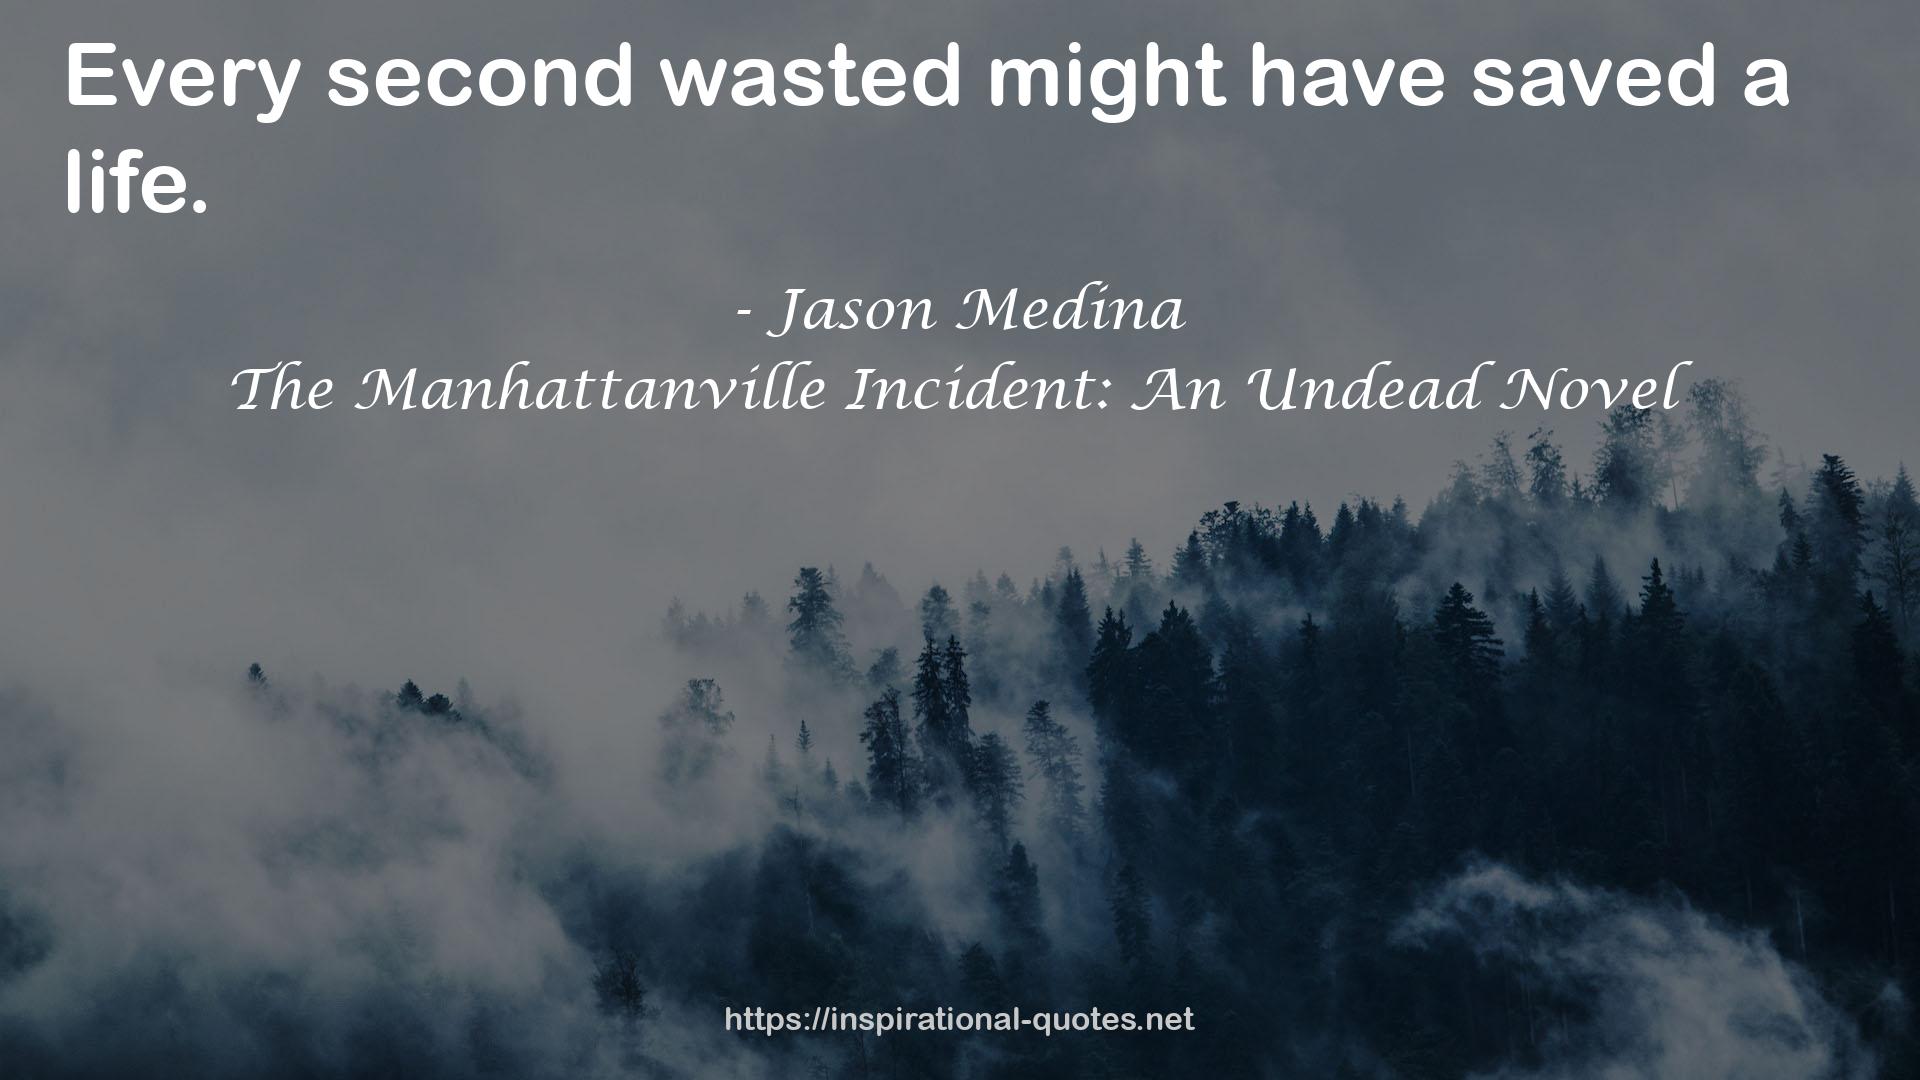 The Manhattanville Incident: An Undead Novel QUOTES